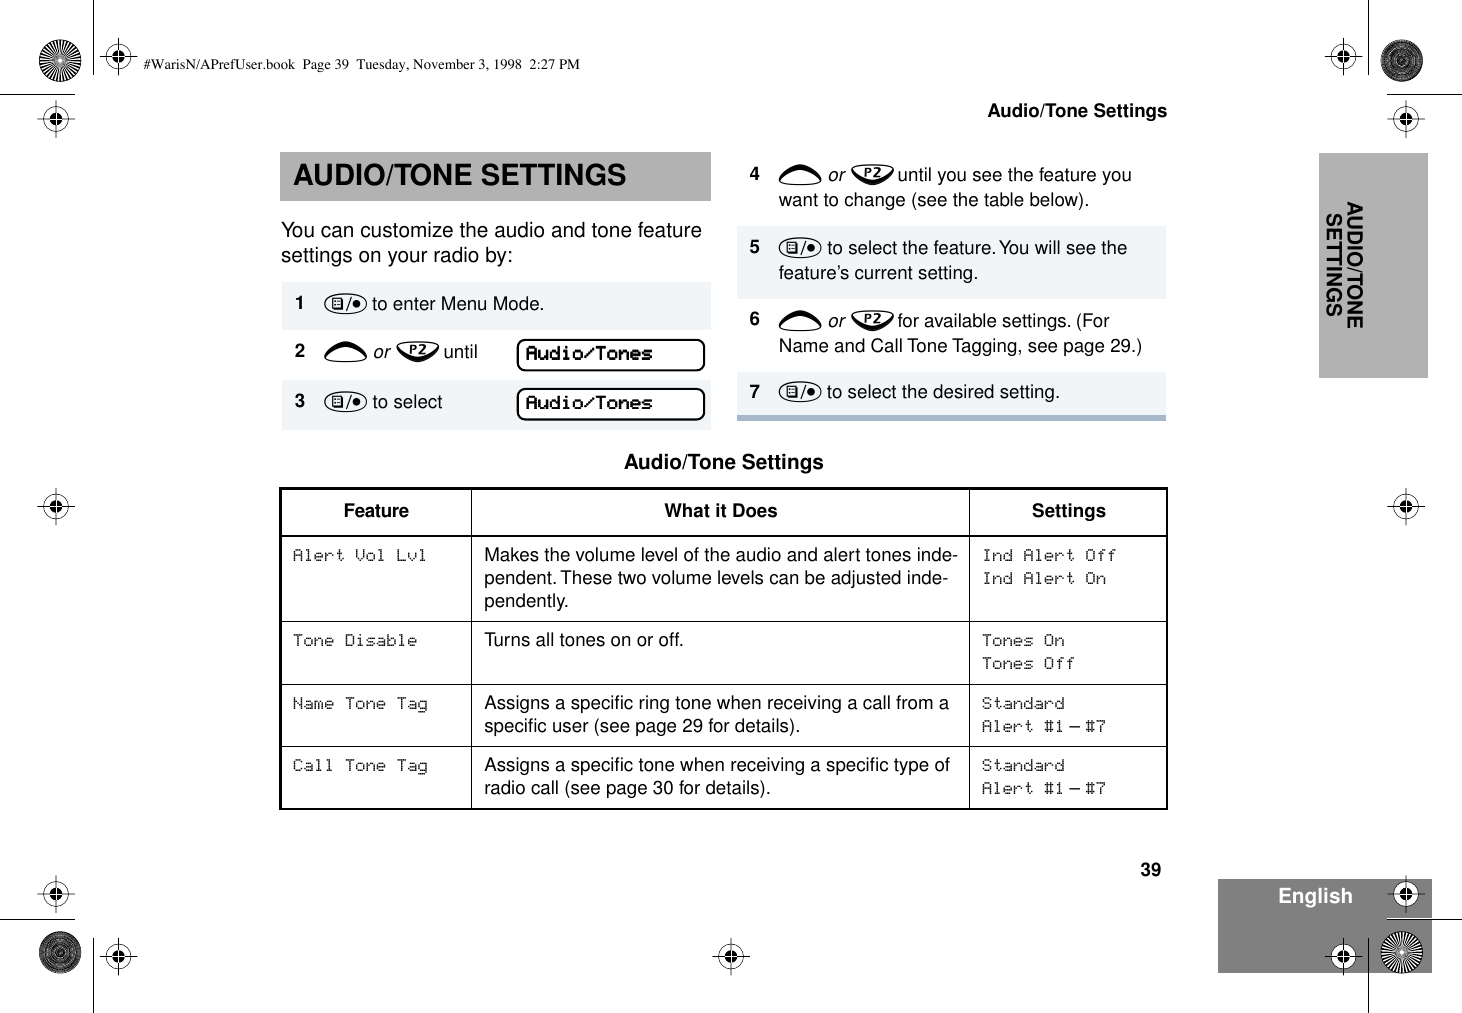 39Audio/Tone SettingsEnglishAUDIO/TONE SETTINGSAUDIO/TONE SETTINGSYou can customize the audio and tone feature settings on your radio by:1) to enter Menu Mode.2+ or ? until  Audio/Tones3) to select  Audio/Tones4+ or ? until you see the feature you want to change (see the table below).5) to select the feature. You will see the feature’s current setting.6+ or ? for available settings. (For Name and Call Tone Tagging, see page 29.)7) to select the desired setting. Audio/Tone SettingsFeature What it Does SettingsAlert Vol Lvl Makes the volume level of the audio and alert tones inde-pendent. These two volume levels can be adjusted inde-pendently.Ind Alert OffInd Alert OnTone Disable Turns all tones on or off. Tones OnTones OffName Tone Tag Assigns a speciﬁc ring tone when receiving a call from a speciﬁc user (see page 29 for details). StandardAlert #1 – #7Call Tone Tag Assigns a speciﬁc tone when receiving a speciﬁc type of radio call (see page 30 for details).Standard Alert #1 – #7AAAAuuuuddddiiiioooo////TTTToooonnnneeeessssAAAAuuuuddddiiiioooo////TTTToooonnnneeeessss#WarisN/APrefUser.book  Page 39  Tuesday, November 3, 1998  2:27 PM